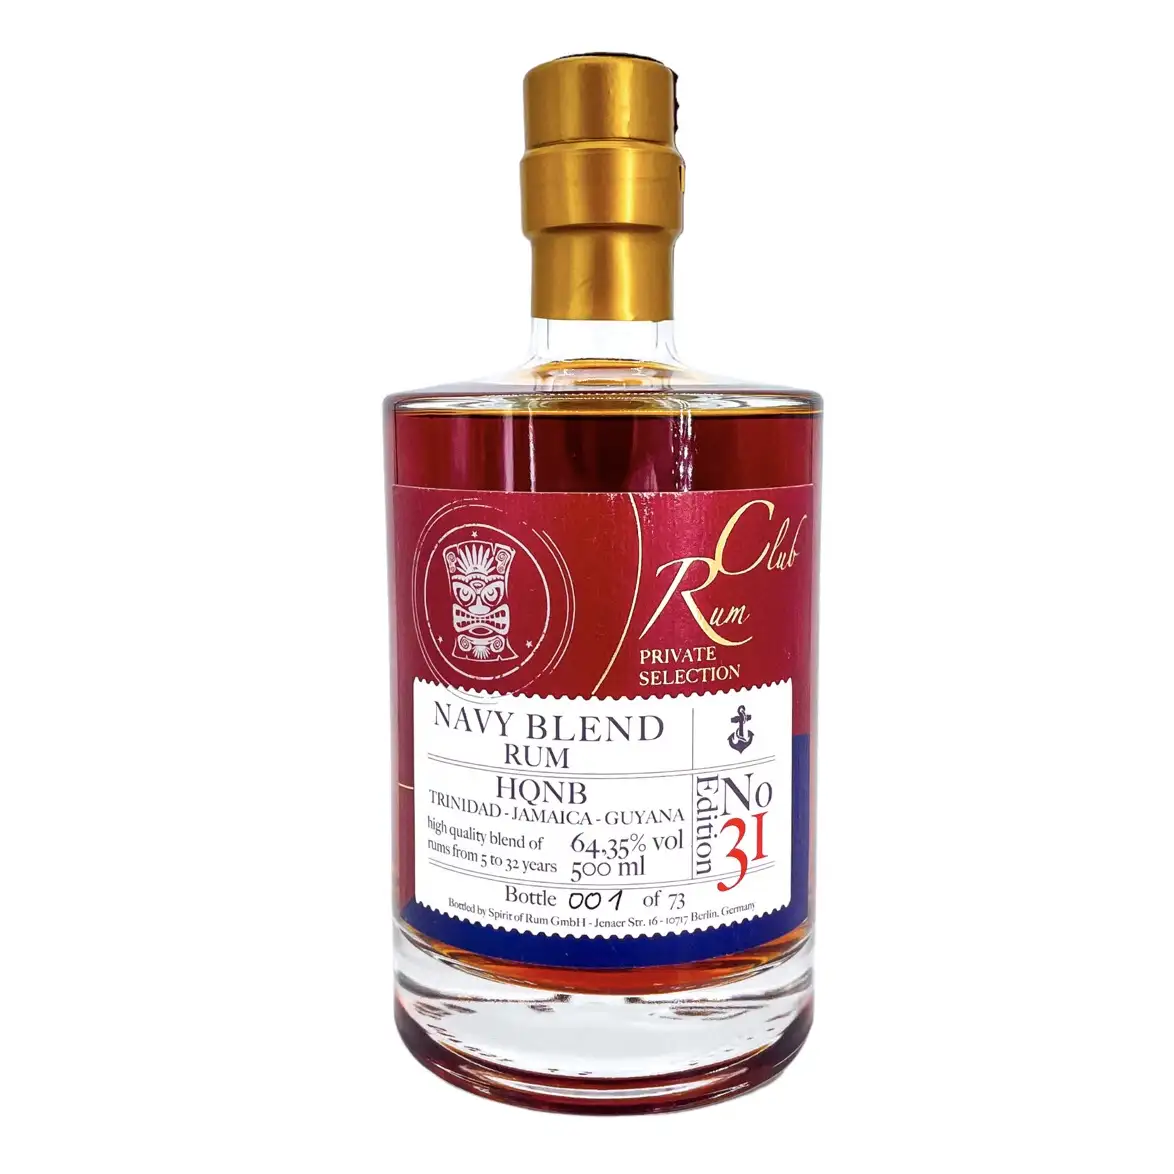 Image of the front of the bottle of the rum Rumclub Private Selection Ed. 31 (Navy Blend Rum HQNB)